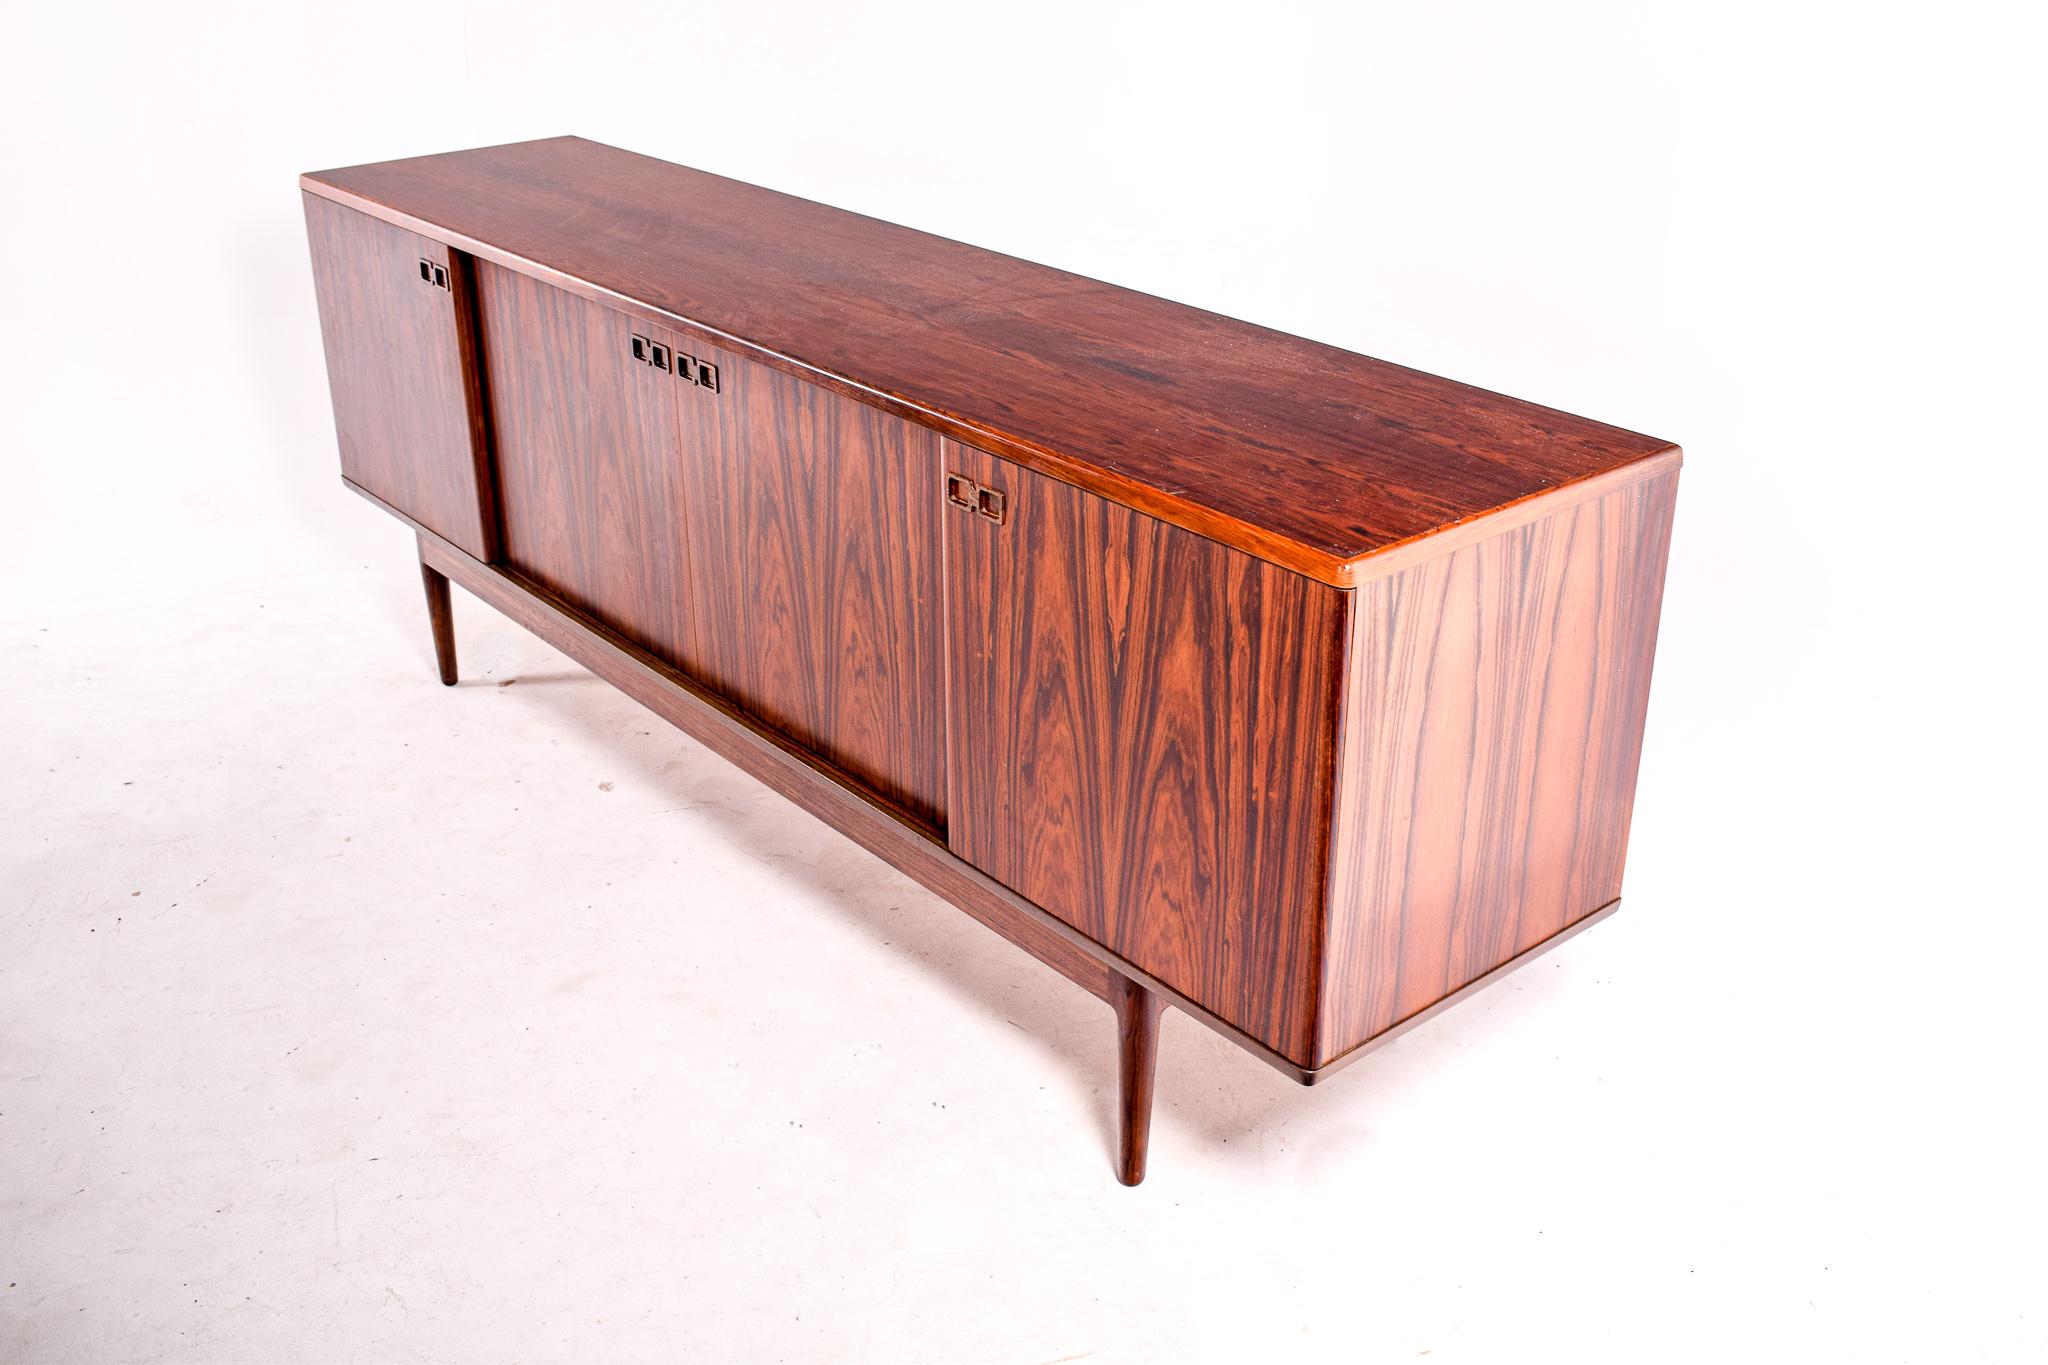 This beautiful sideboard in rosewood was designed by Johannes Andersen in the 1960s. Manufactured by Uldum Møbelfabrik. Consists of four sliding doors, adjustable shelves in height and interior cutlery drawers offering several possibilities of